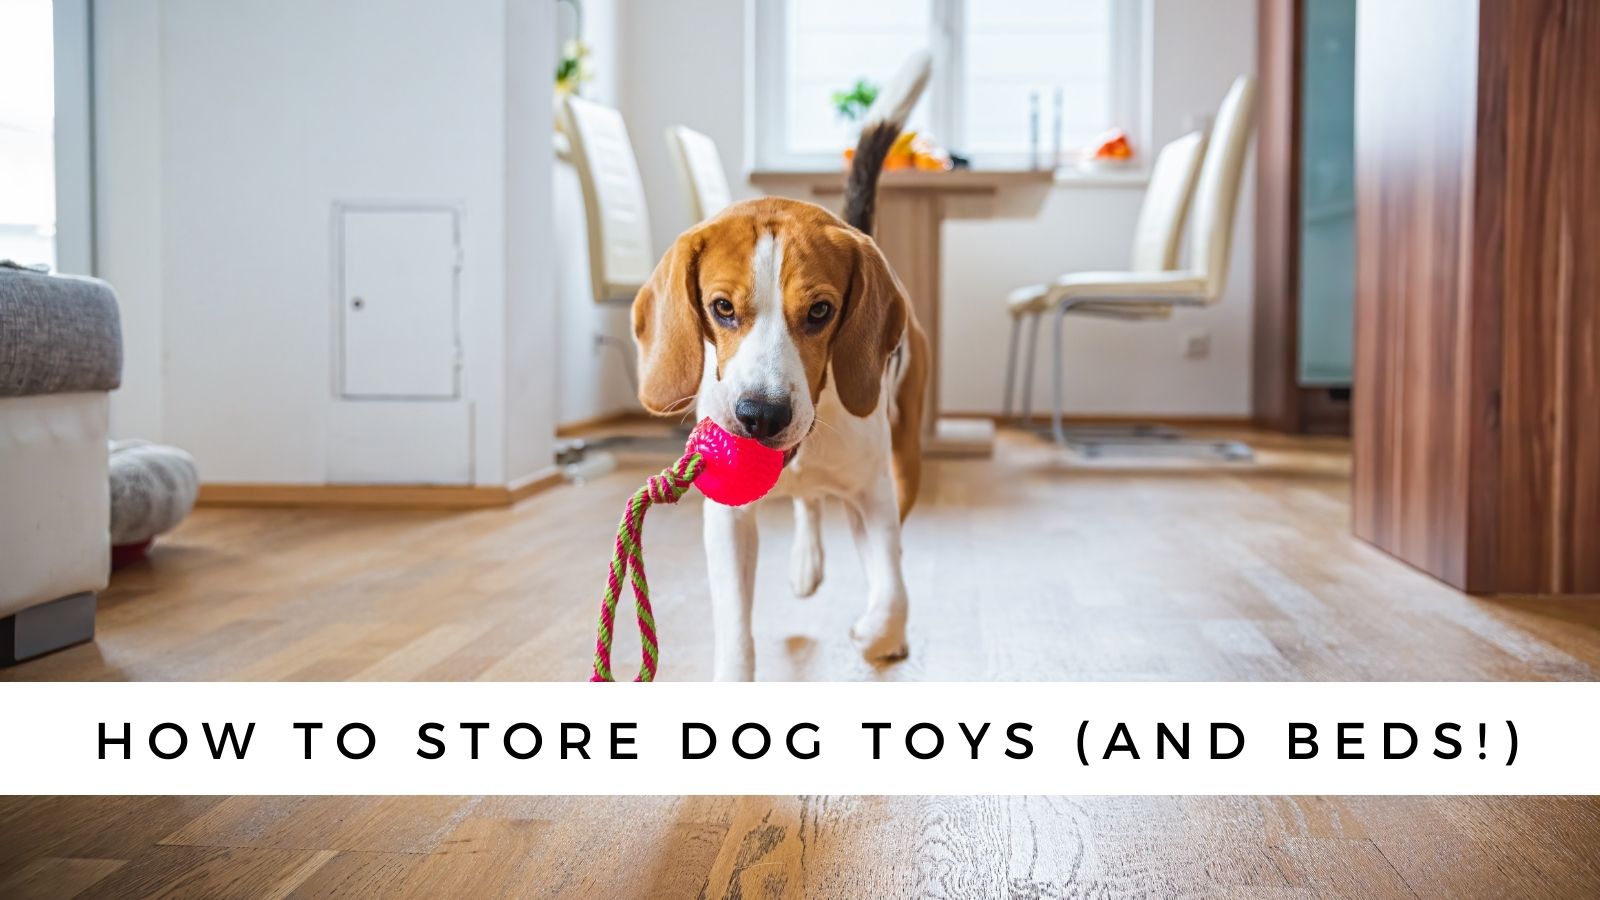 Spoil your dog with these toys, treats, beds and more - Good